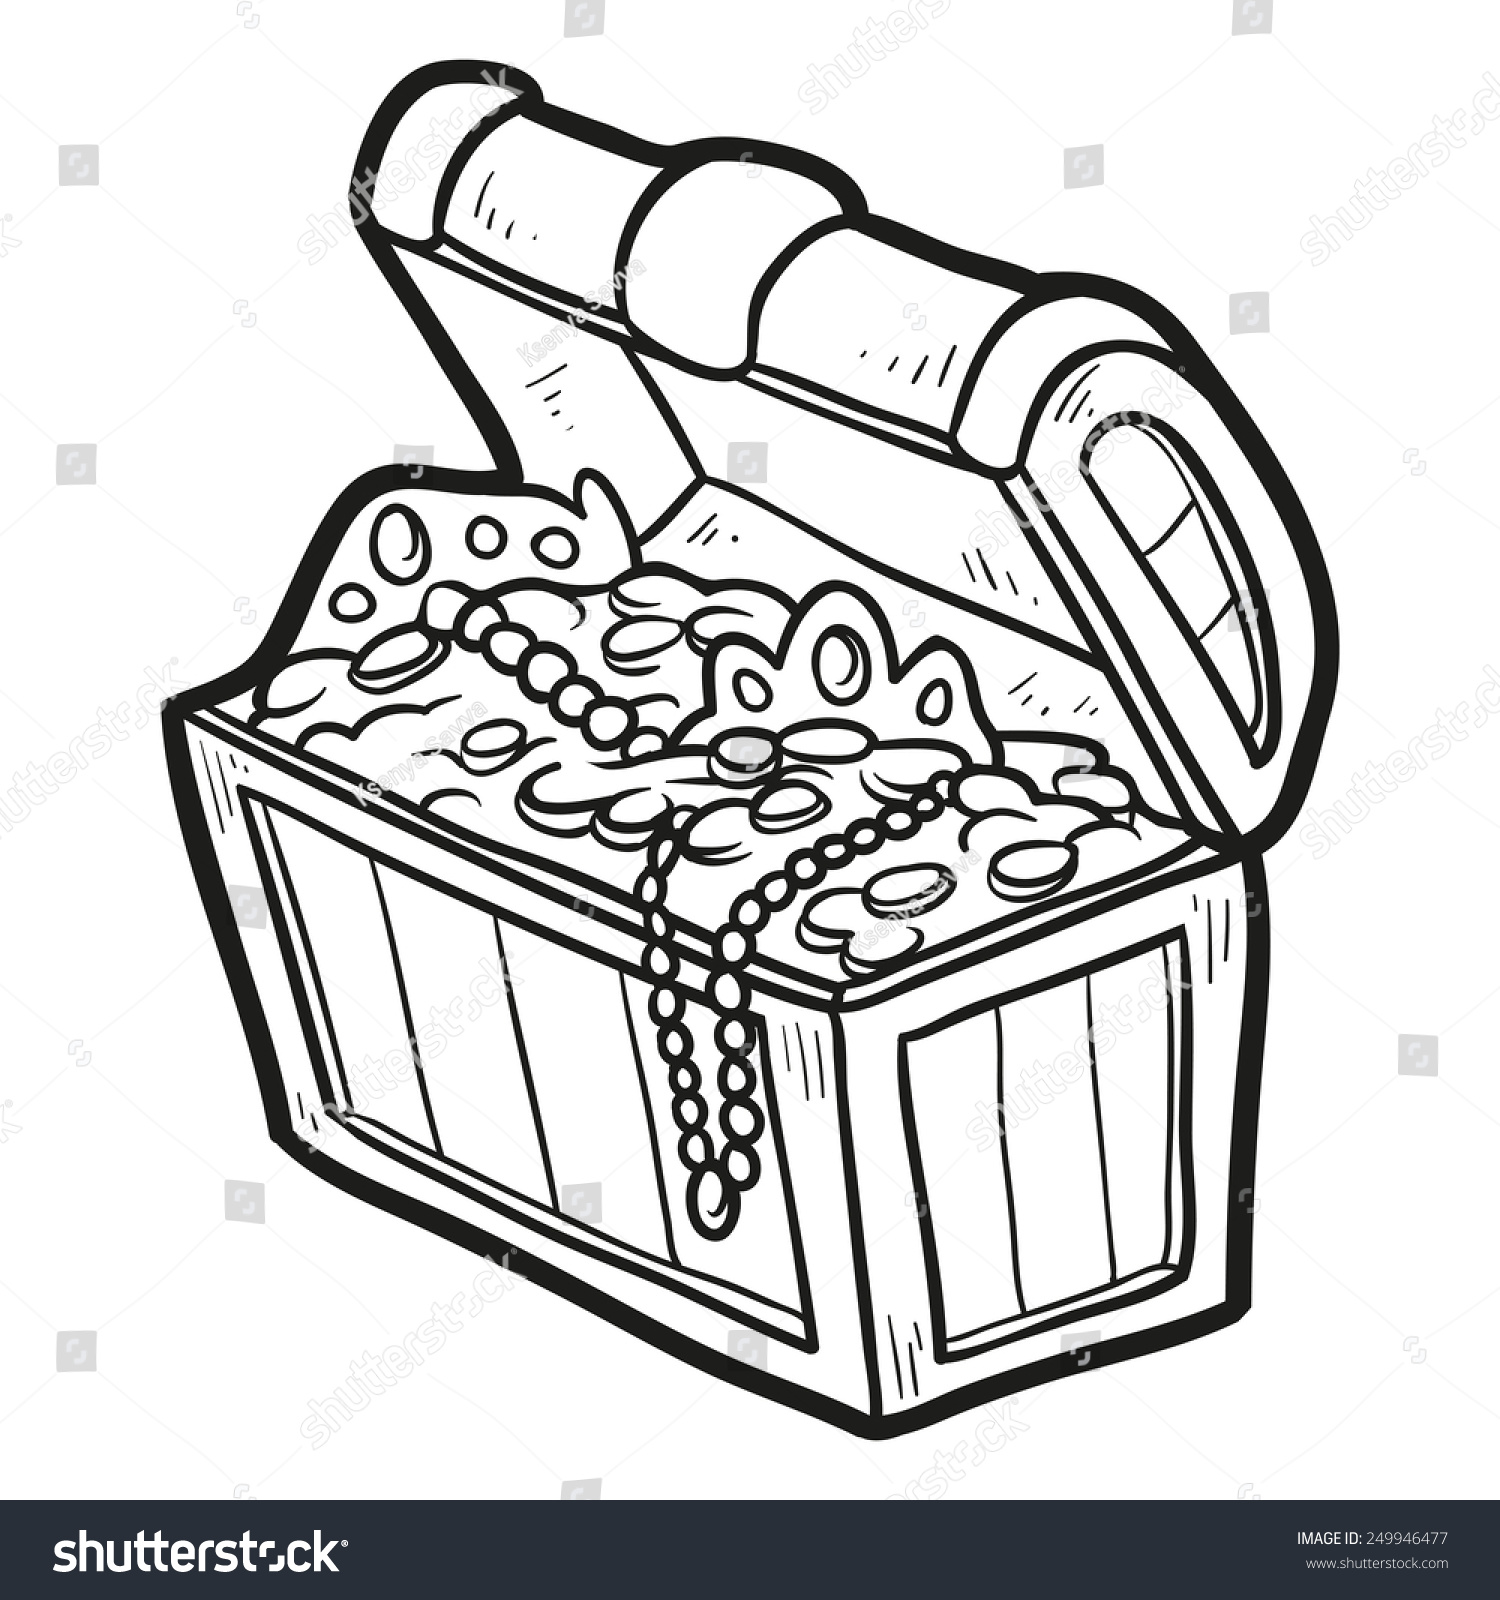 Coloring book treasure chest stock vector royalty free